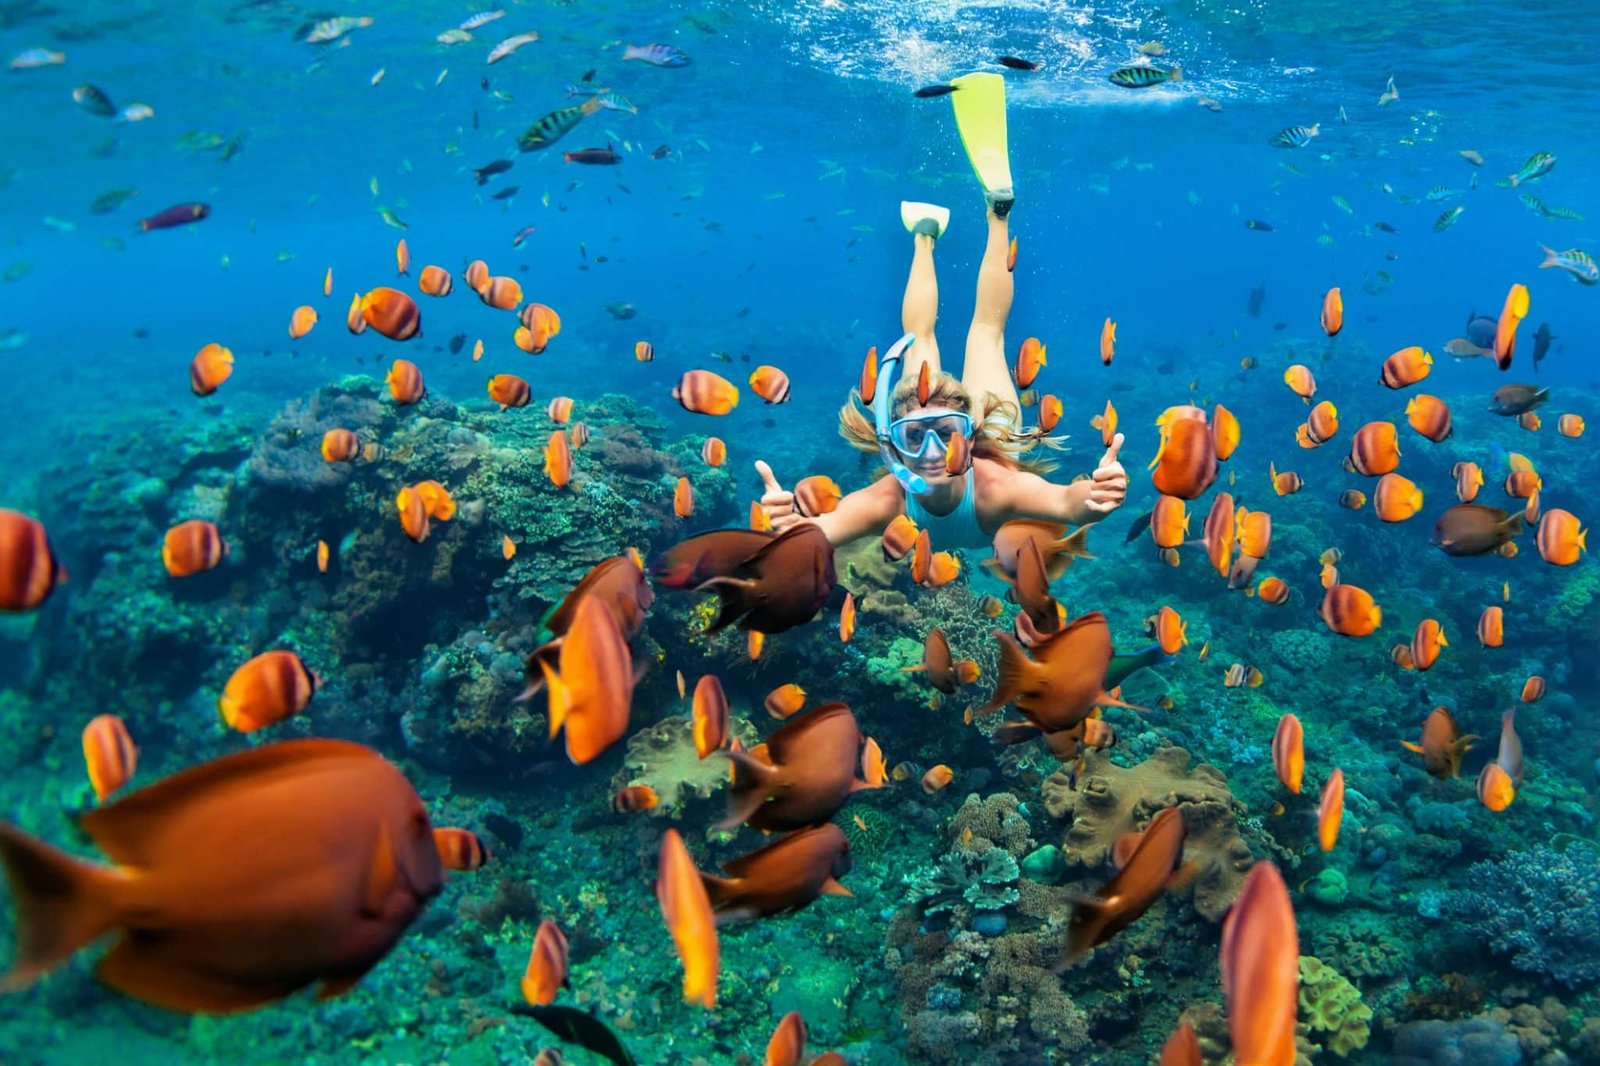 girl in snorkeling mask dive underwater with tropical fishes in coral reef sea pool.